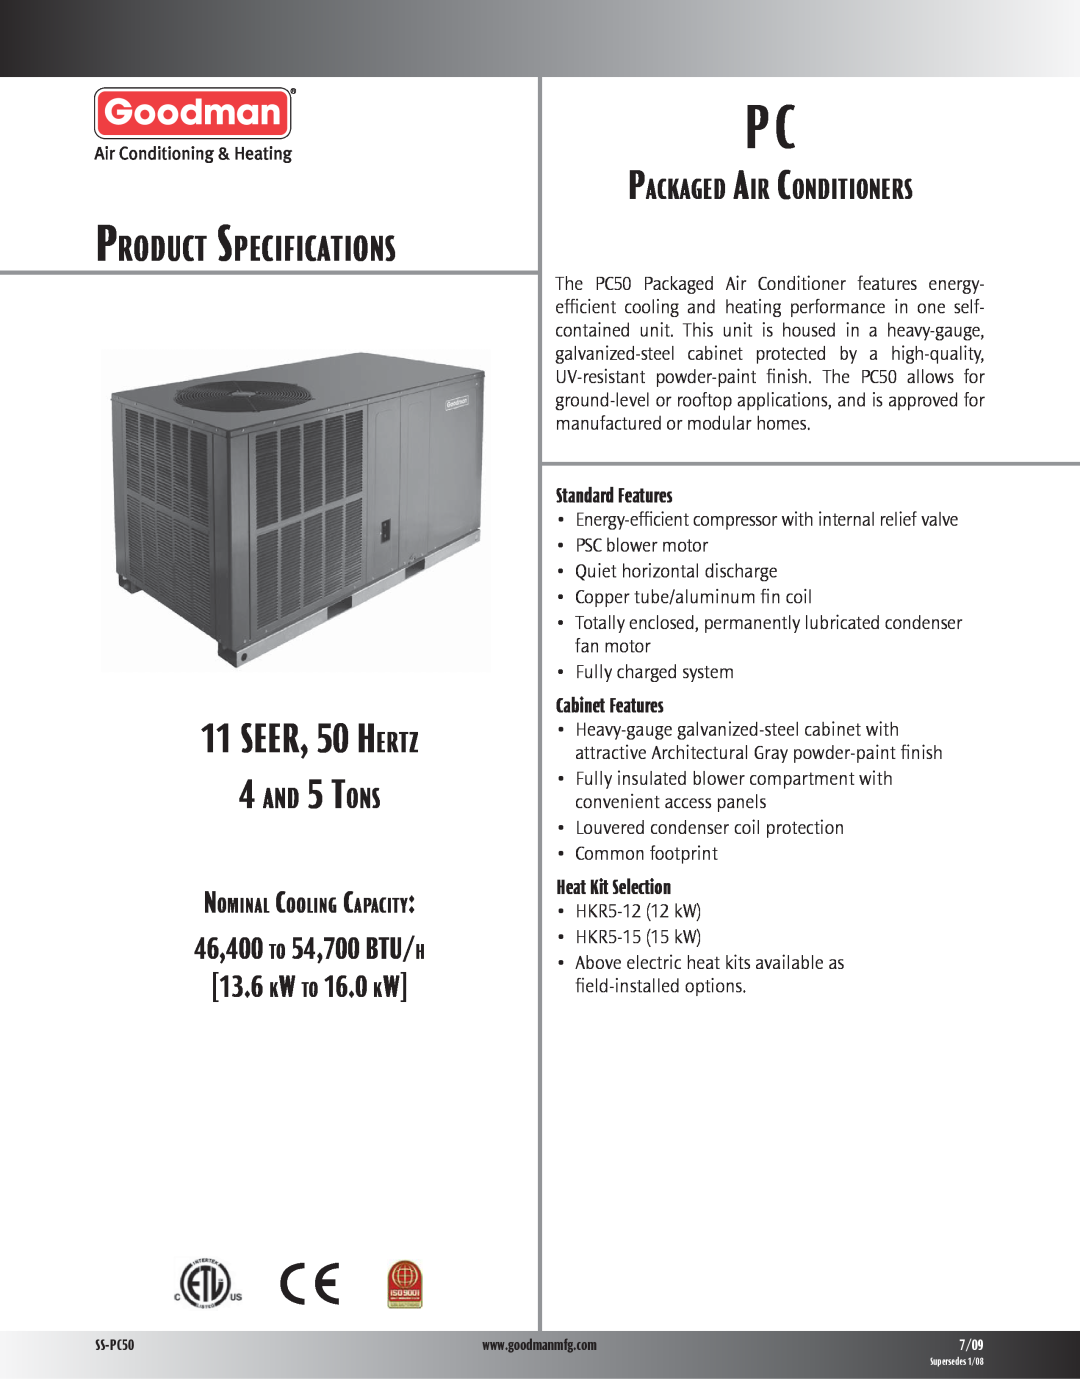 Goodman Mfg PC50 specifications Standard Features, Cabinet Features, Heat Kit Selection, 11SEER, 50 HERTZ, AND 5 TONS 